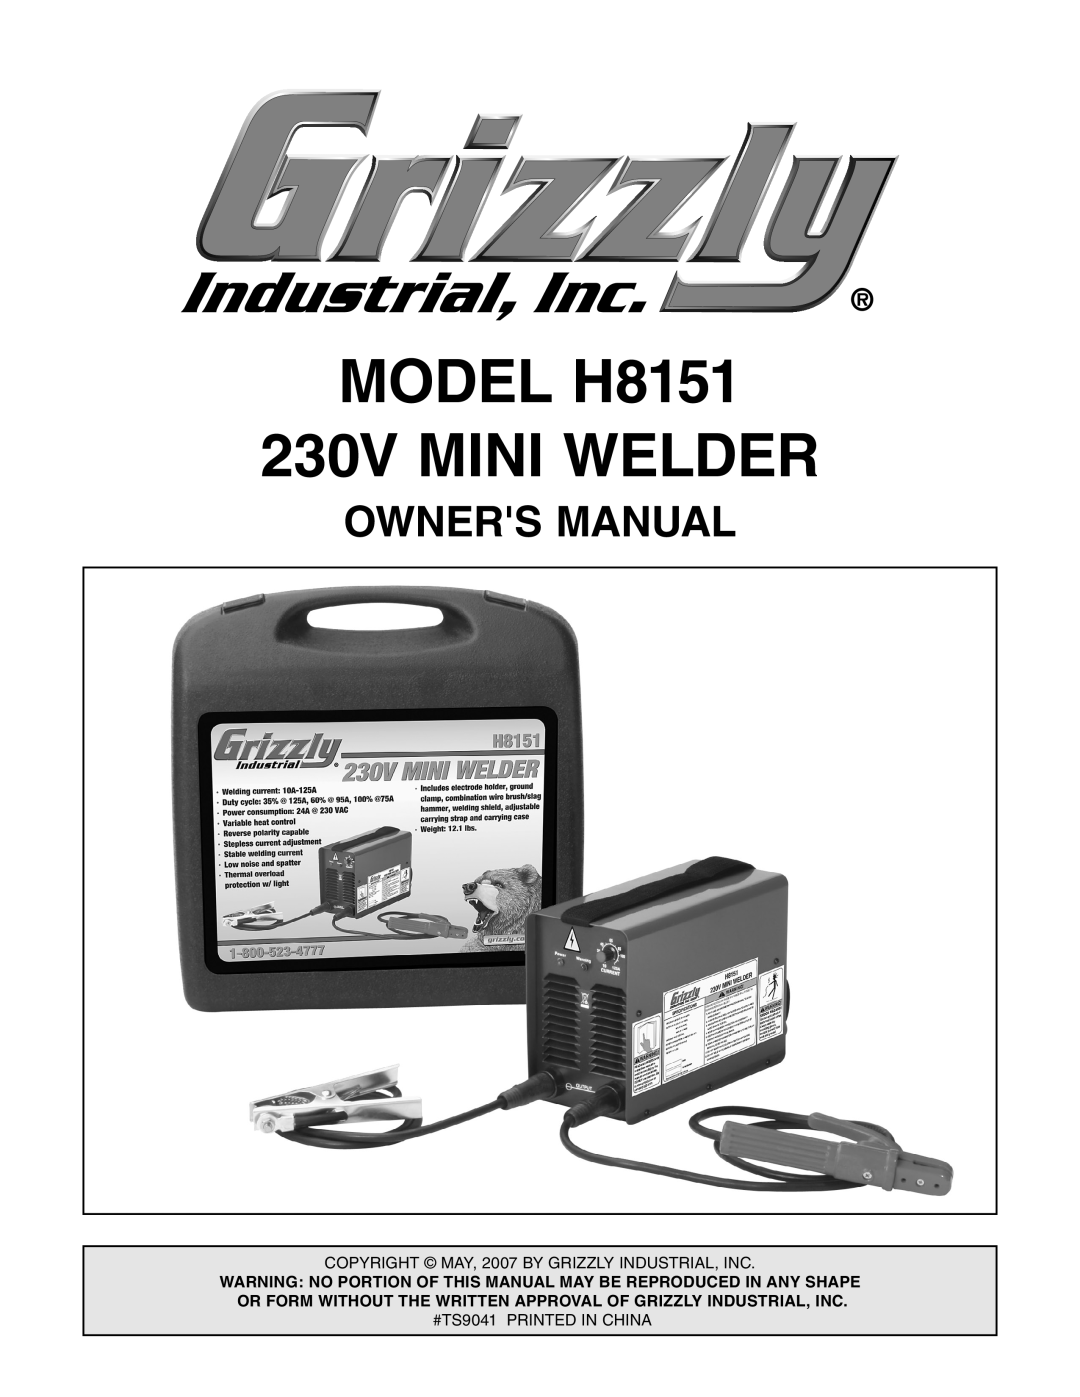 Grizzly owner manual Owners Manual, MODEL H8151 230V MINI WELDER 